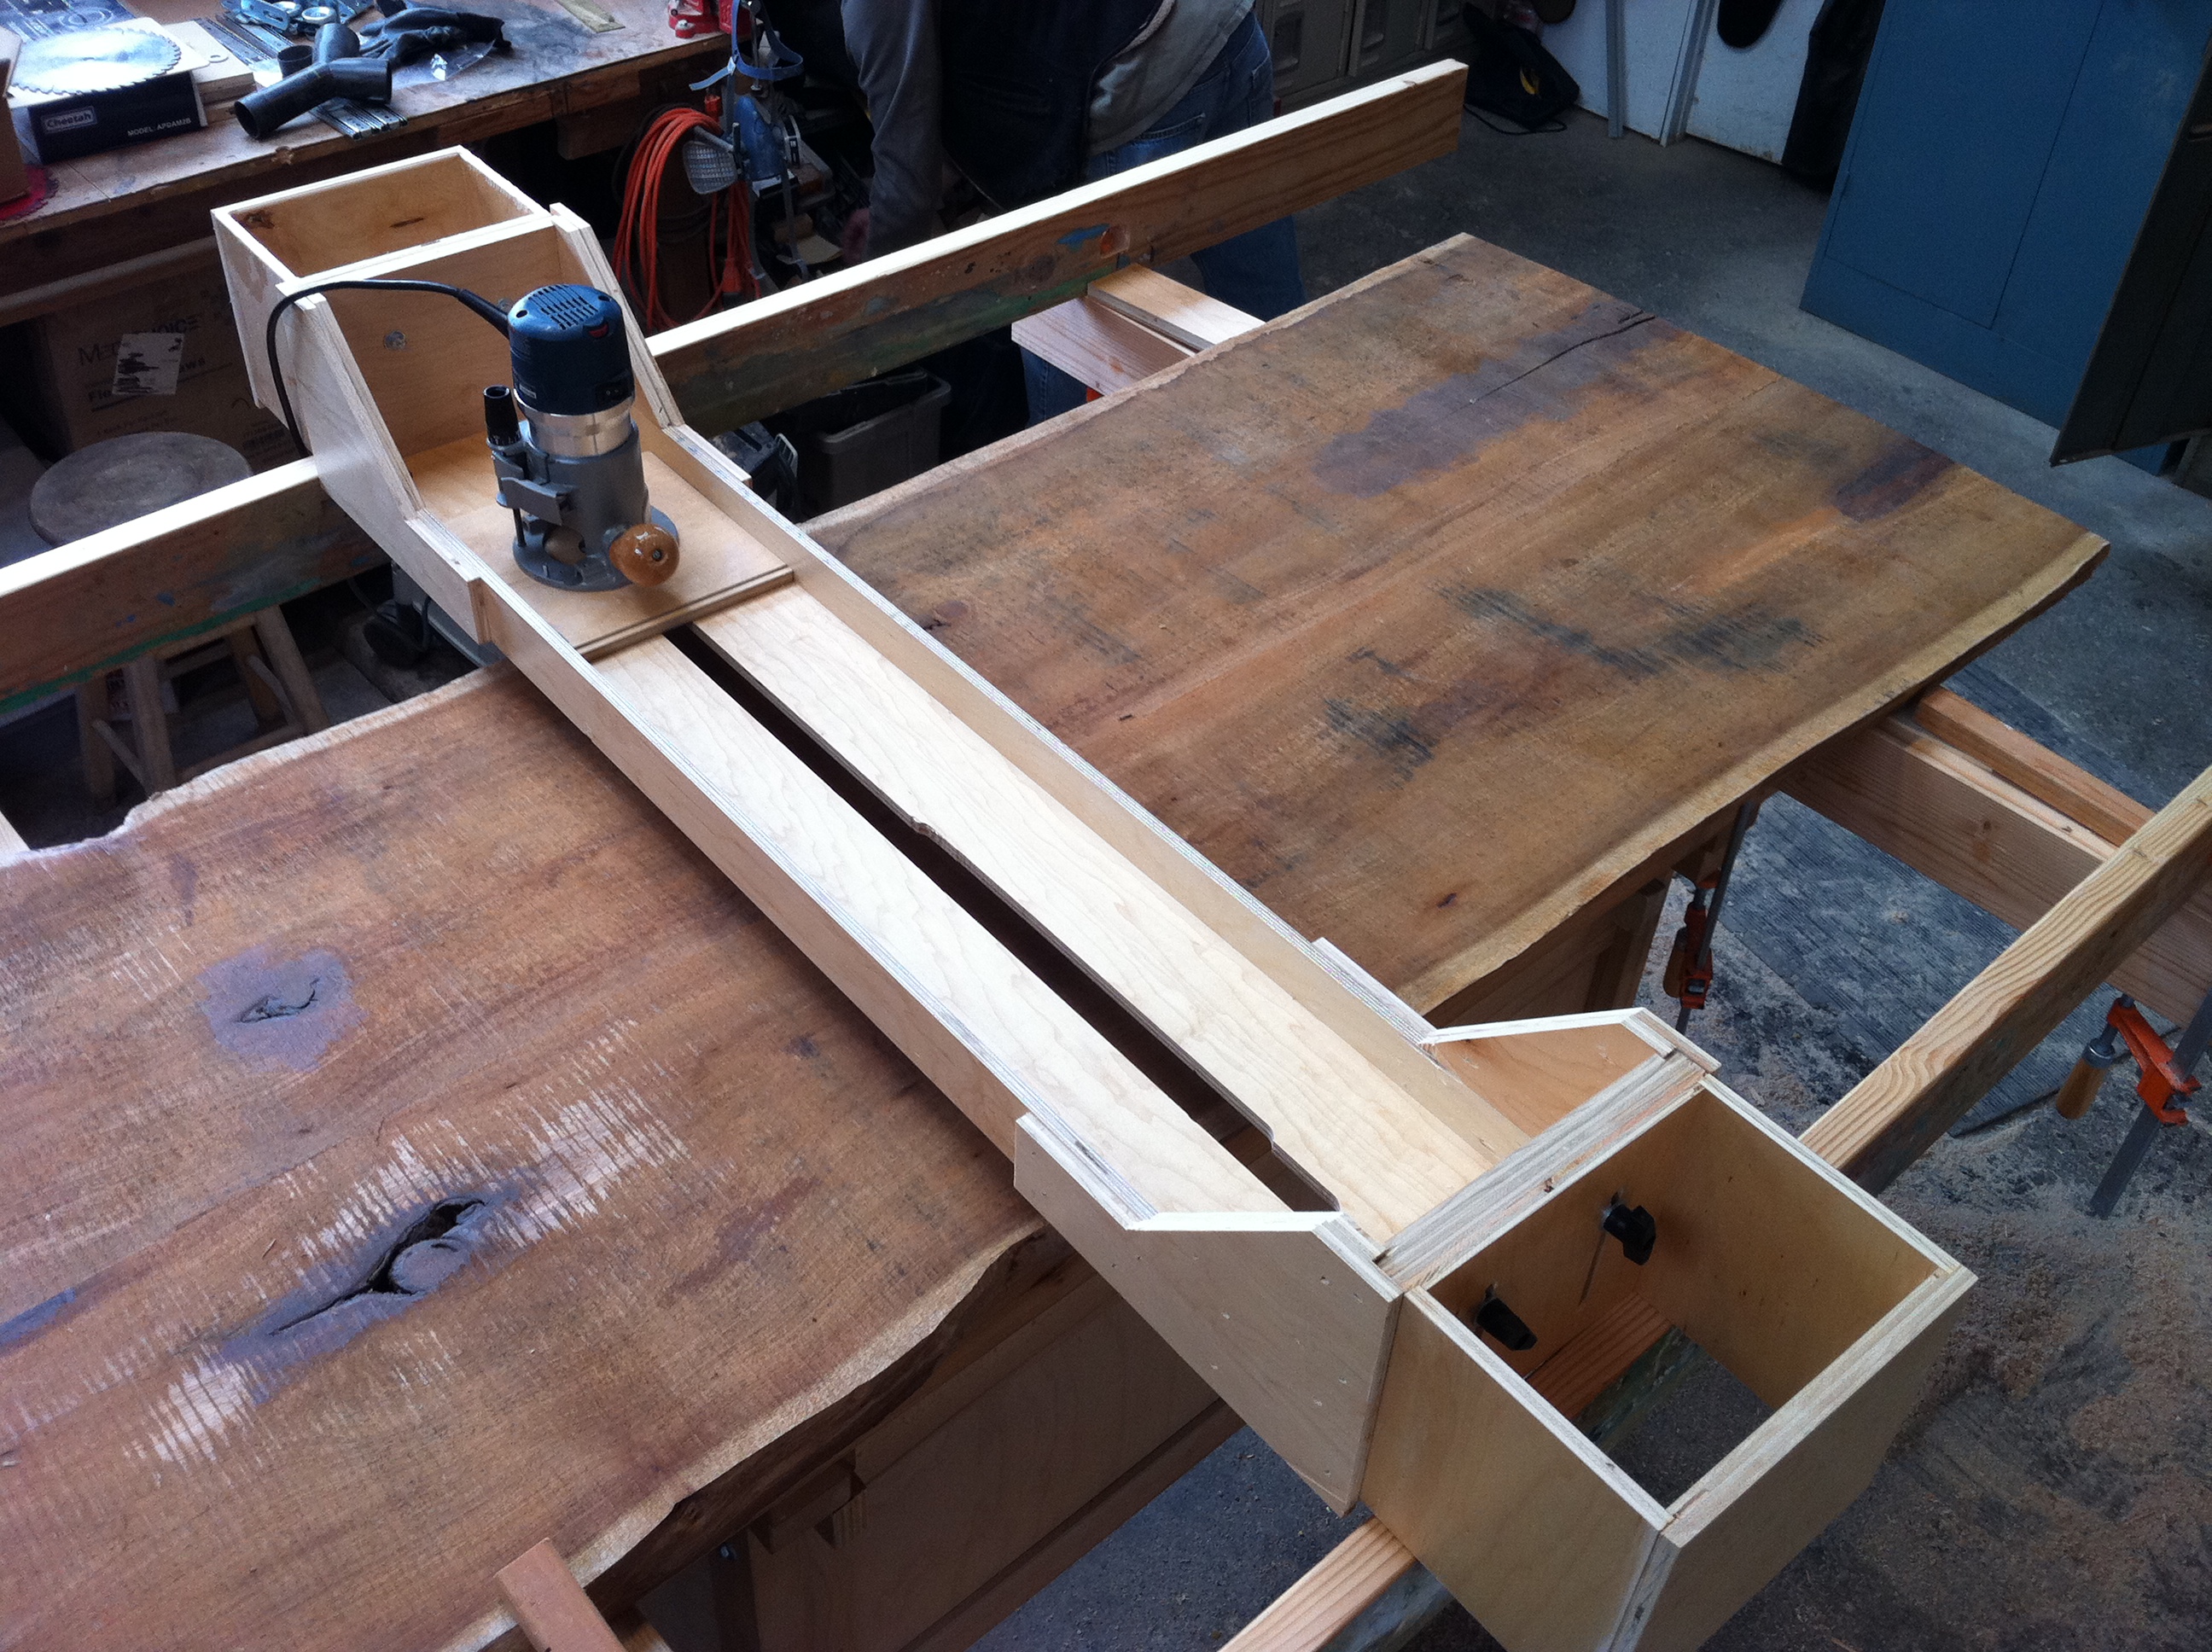 Slab Wood Router Jig for Flattening